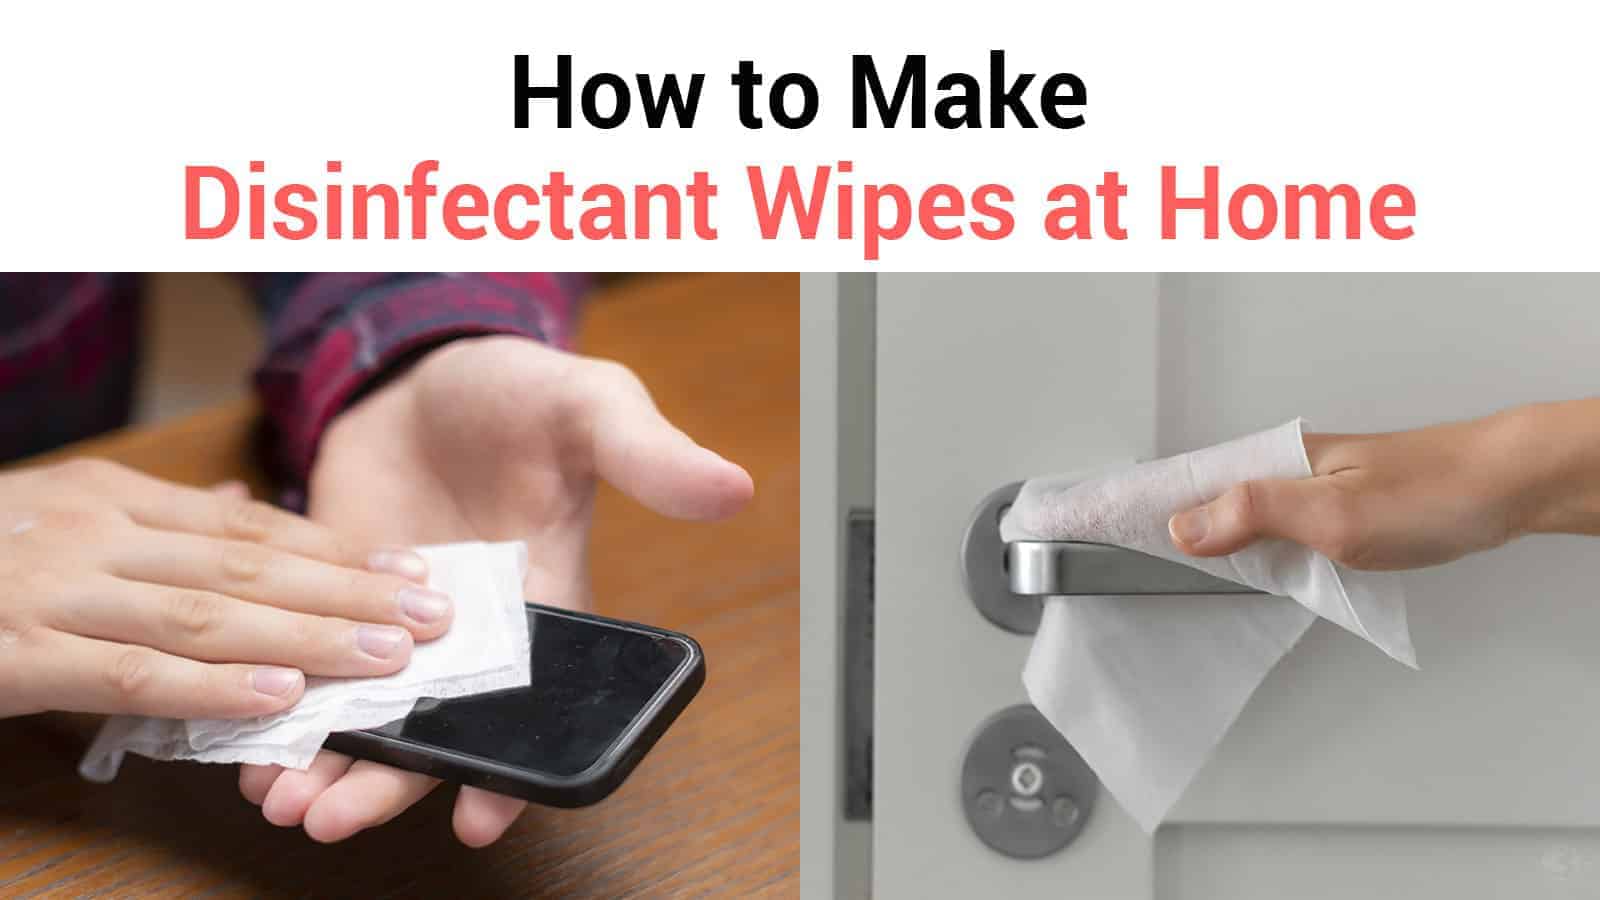 How to Make Disinfectant Wipes at Home